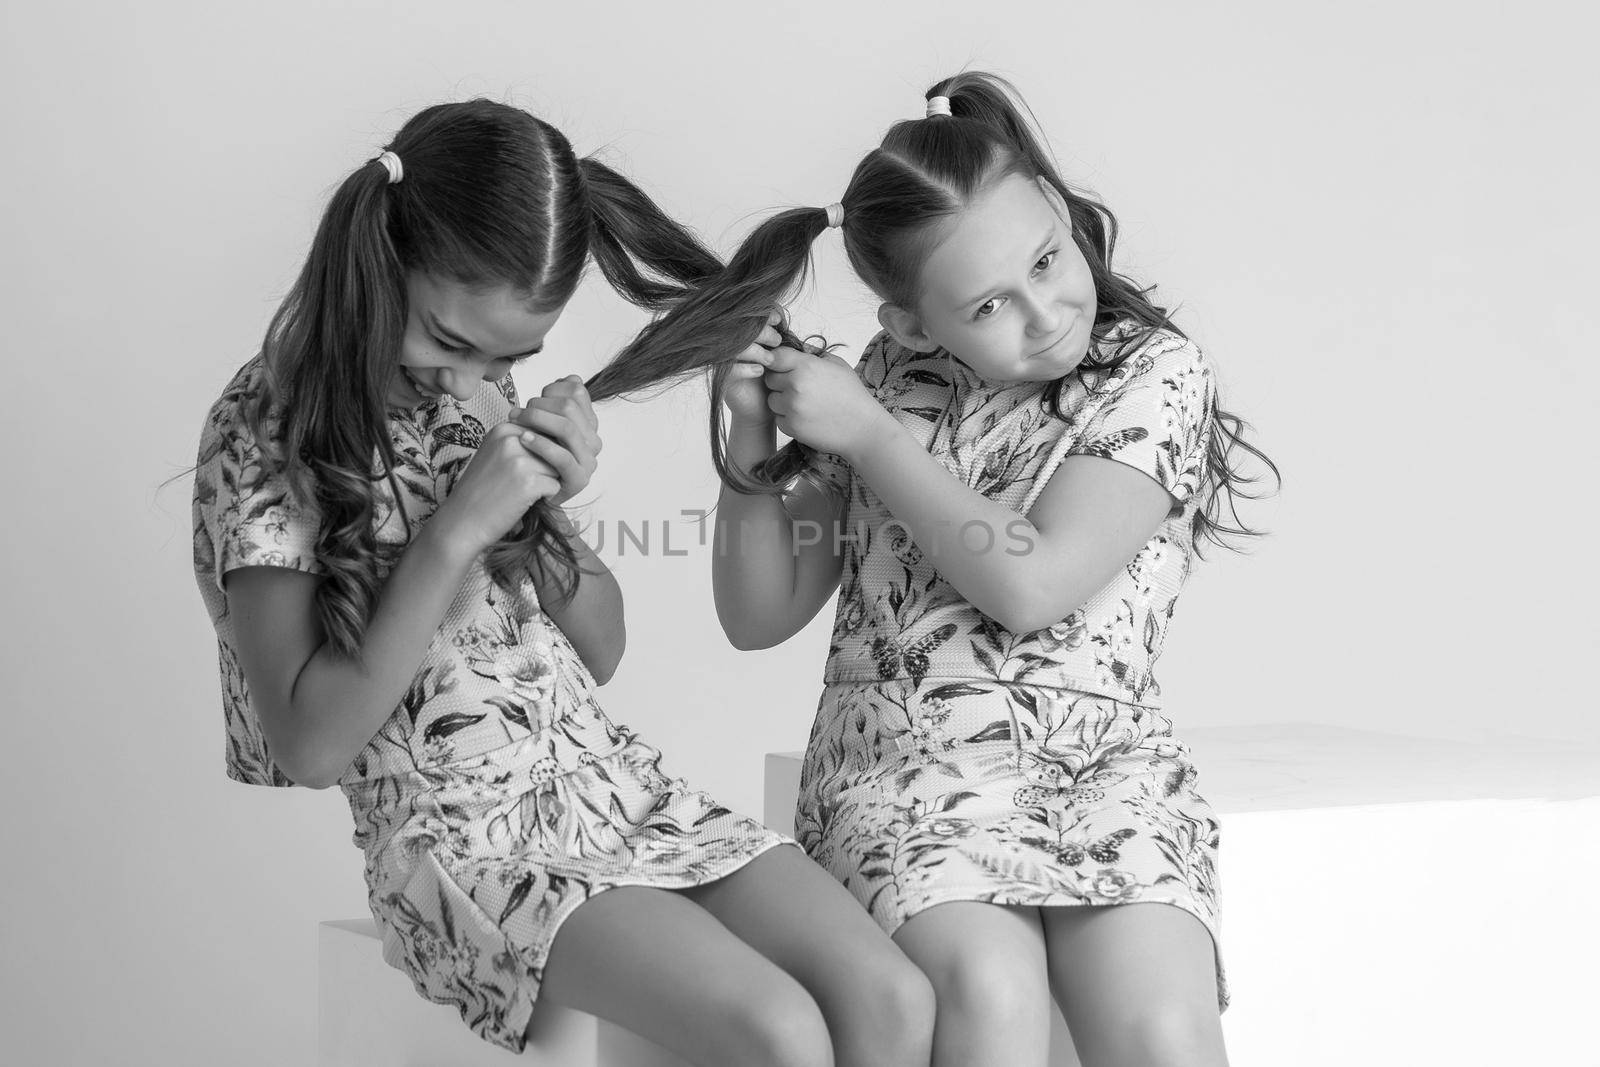 Kind funny girls pull each other for pigtails. The concept of tenderness and beauty.